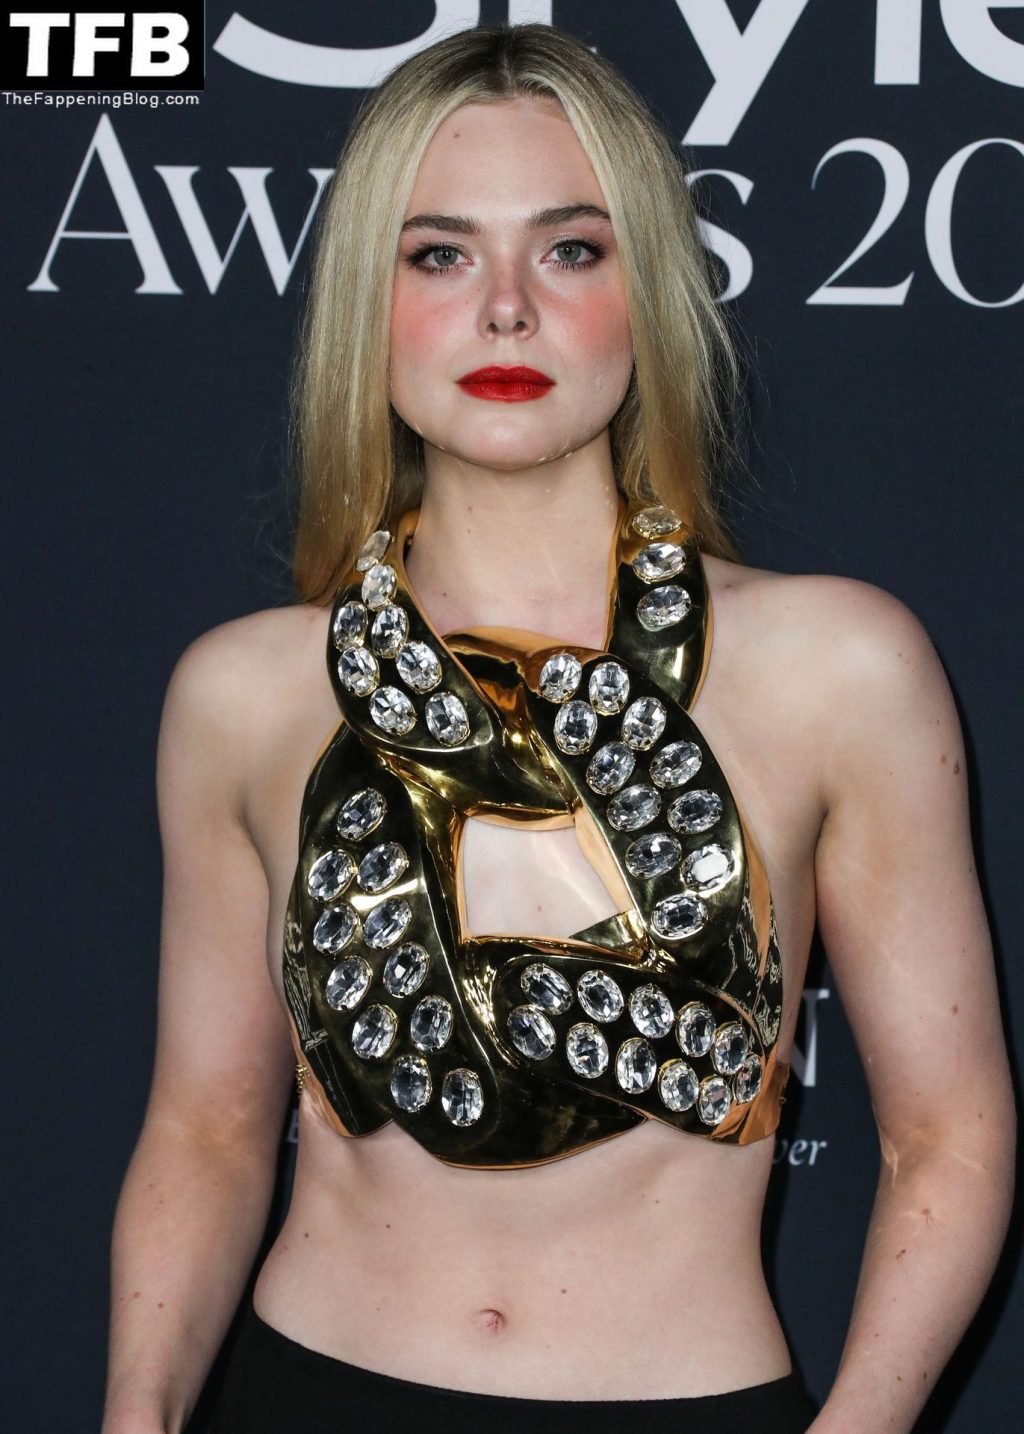 Elle Fanning Shows Plenty of Midriff as She Poses at the 6th Annual InStyle Awards (106 Photos)